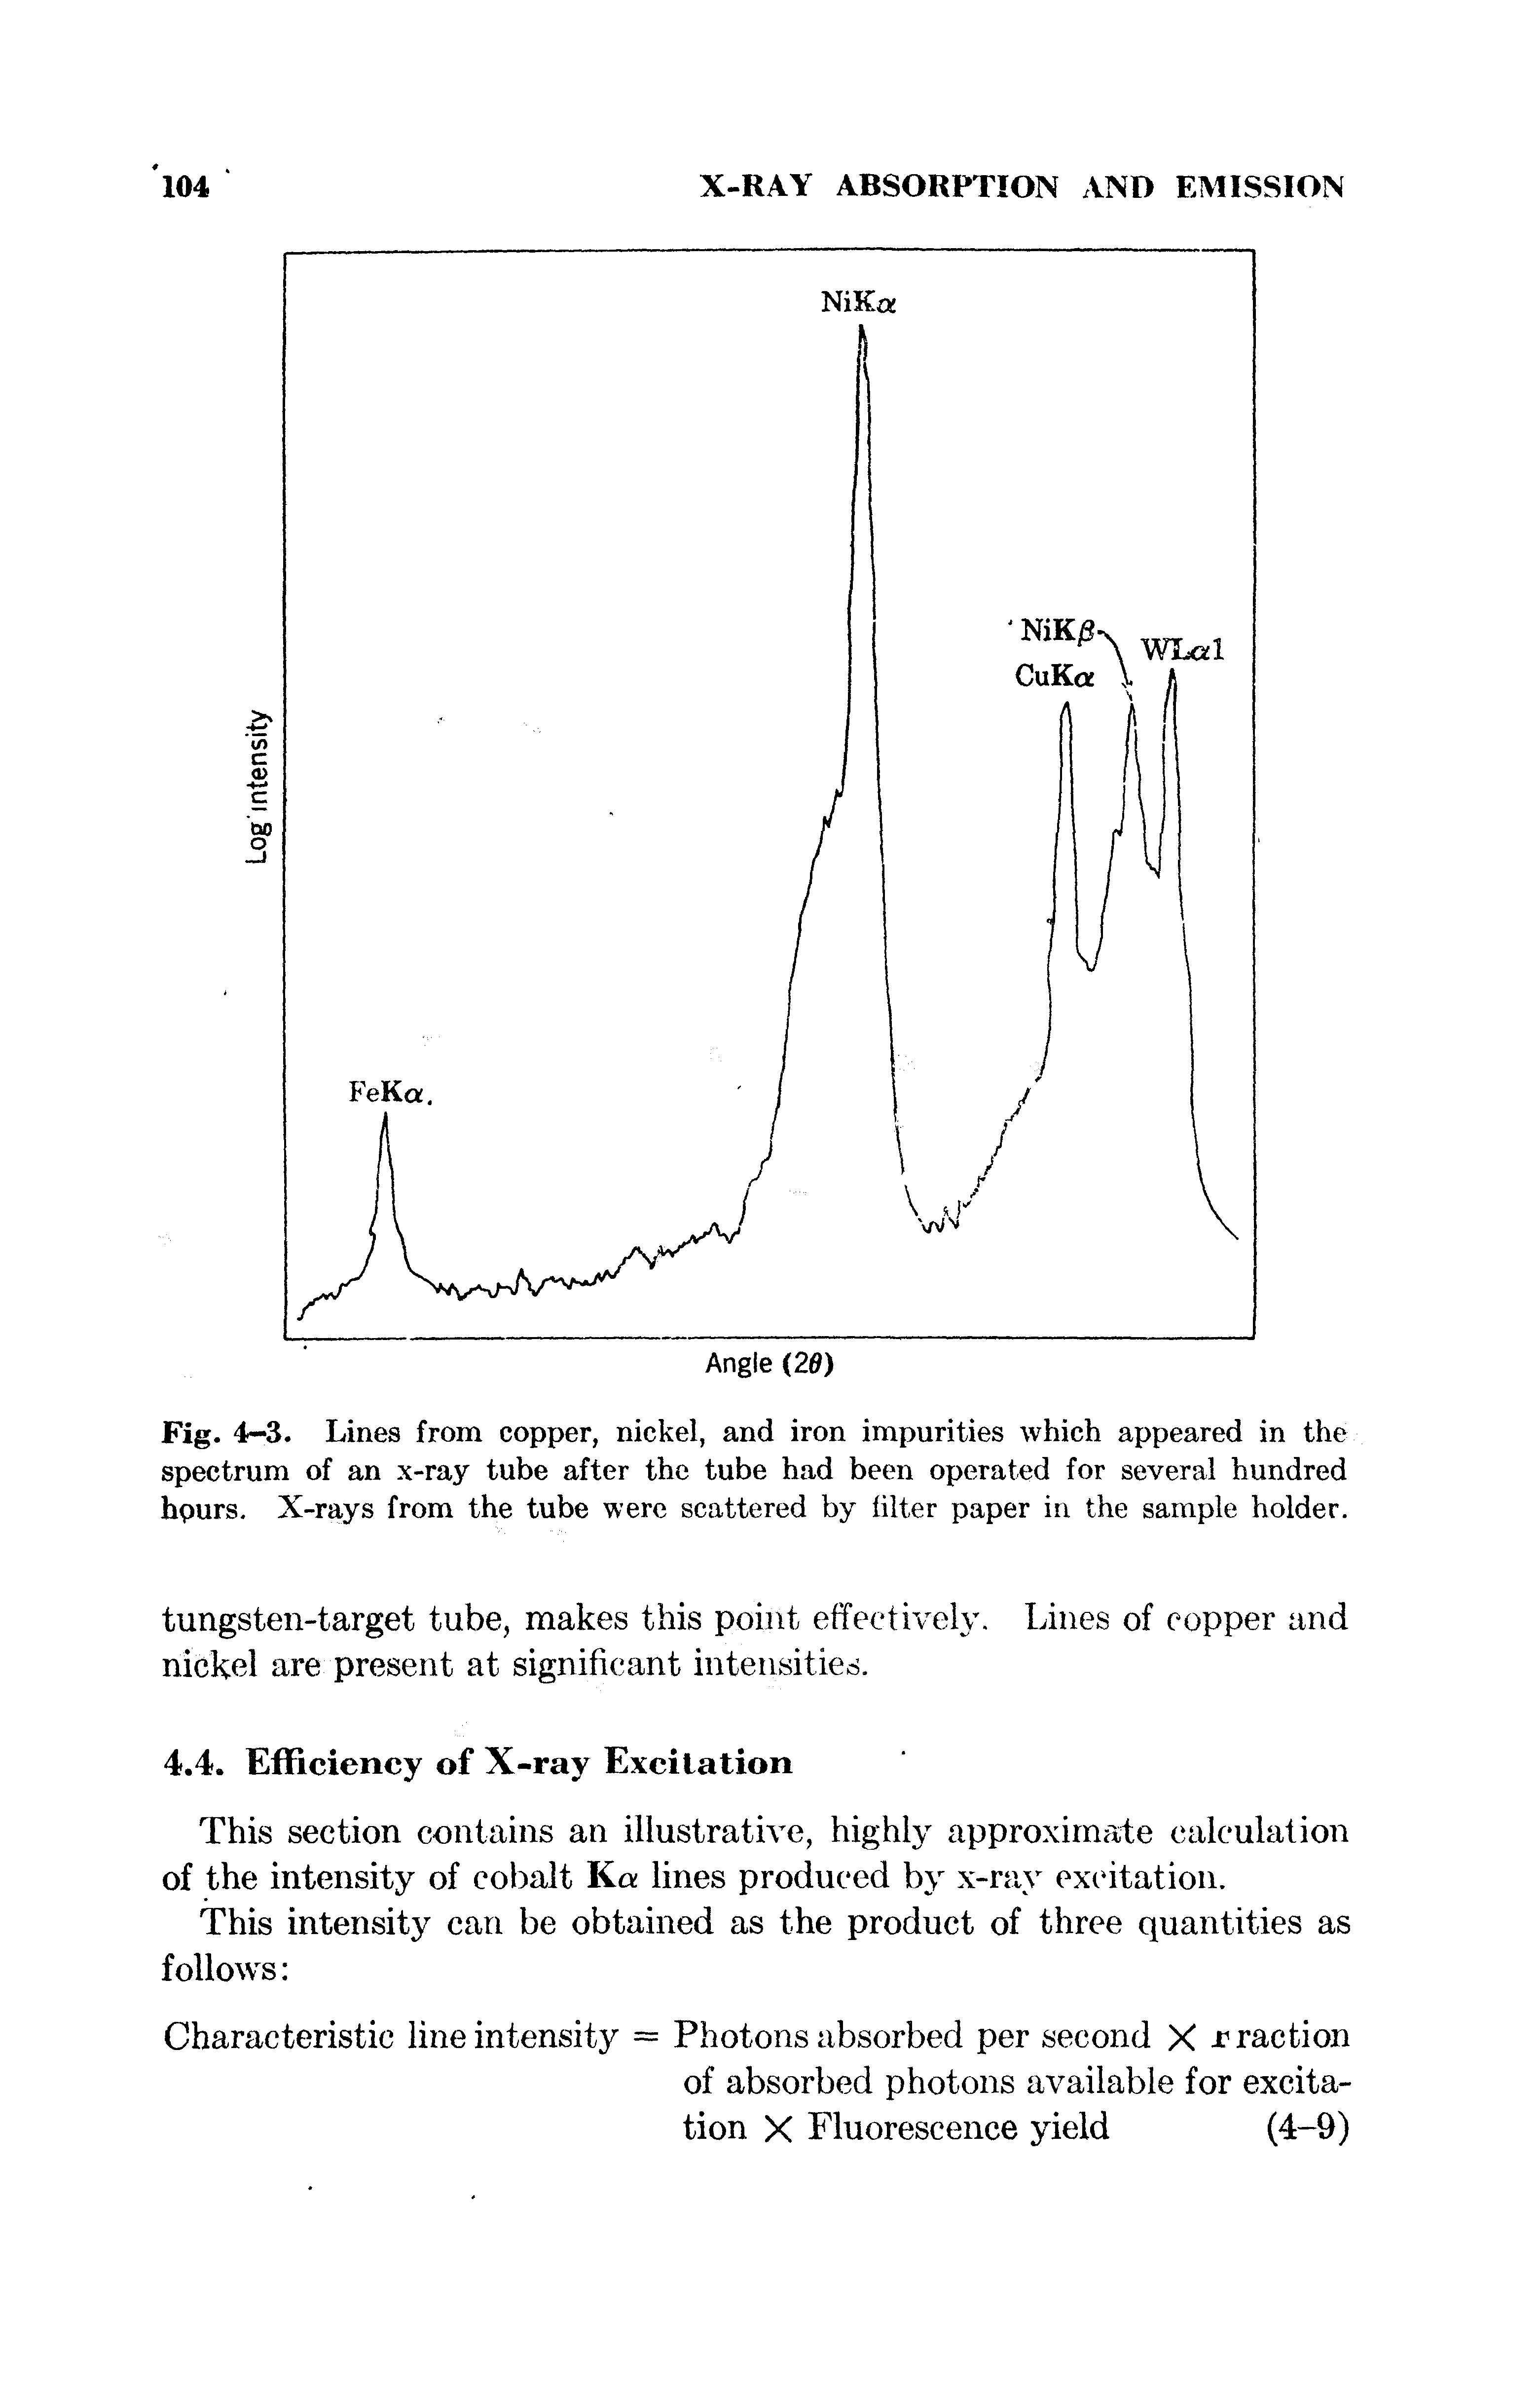 Fig. 4-3. Lines from copper, nickel, and iron impurities which appeared in the spectrum of an x-ray tube after the tube had been operated for several hundred hpurs. X-rays from the tube were scattered by filter paper in the sample holder.